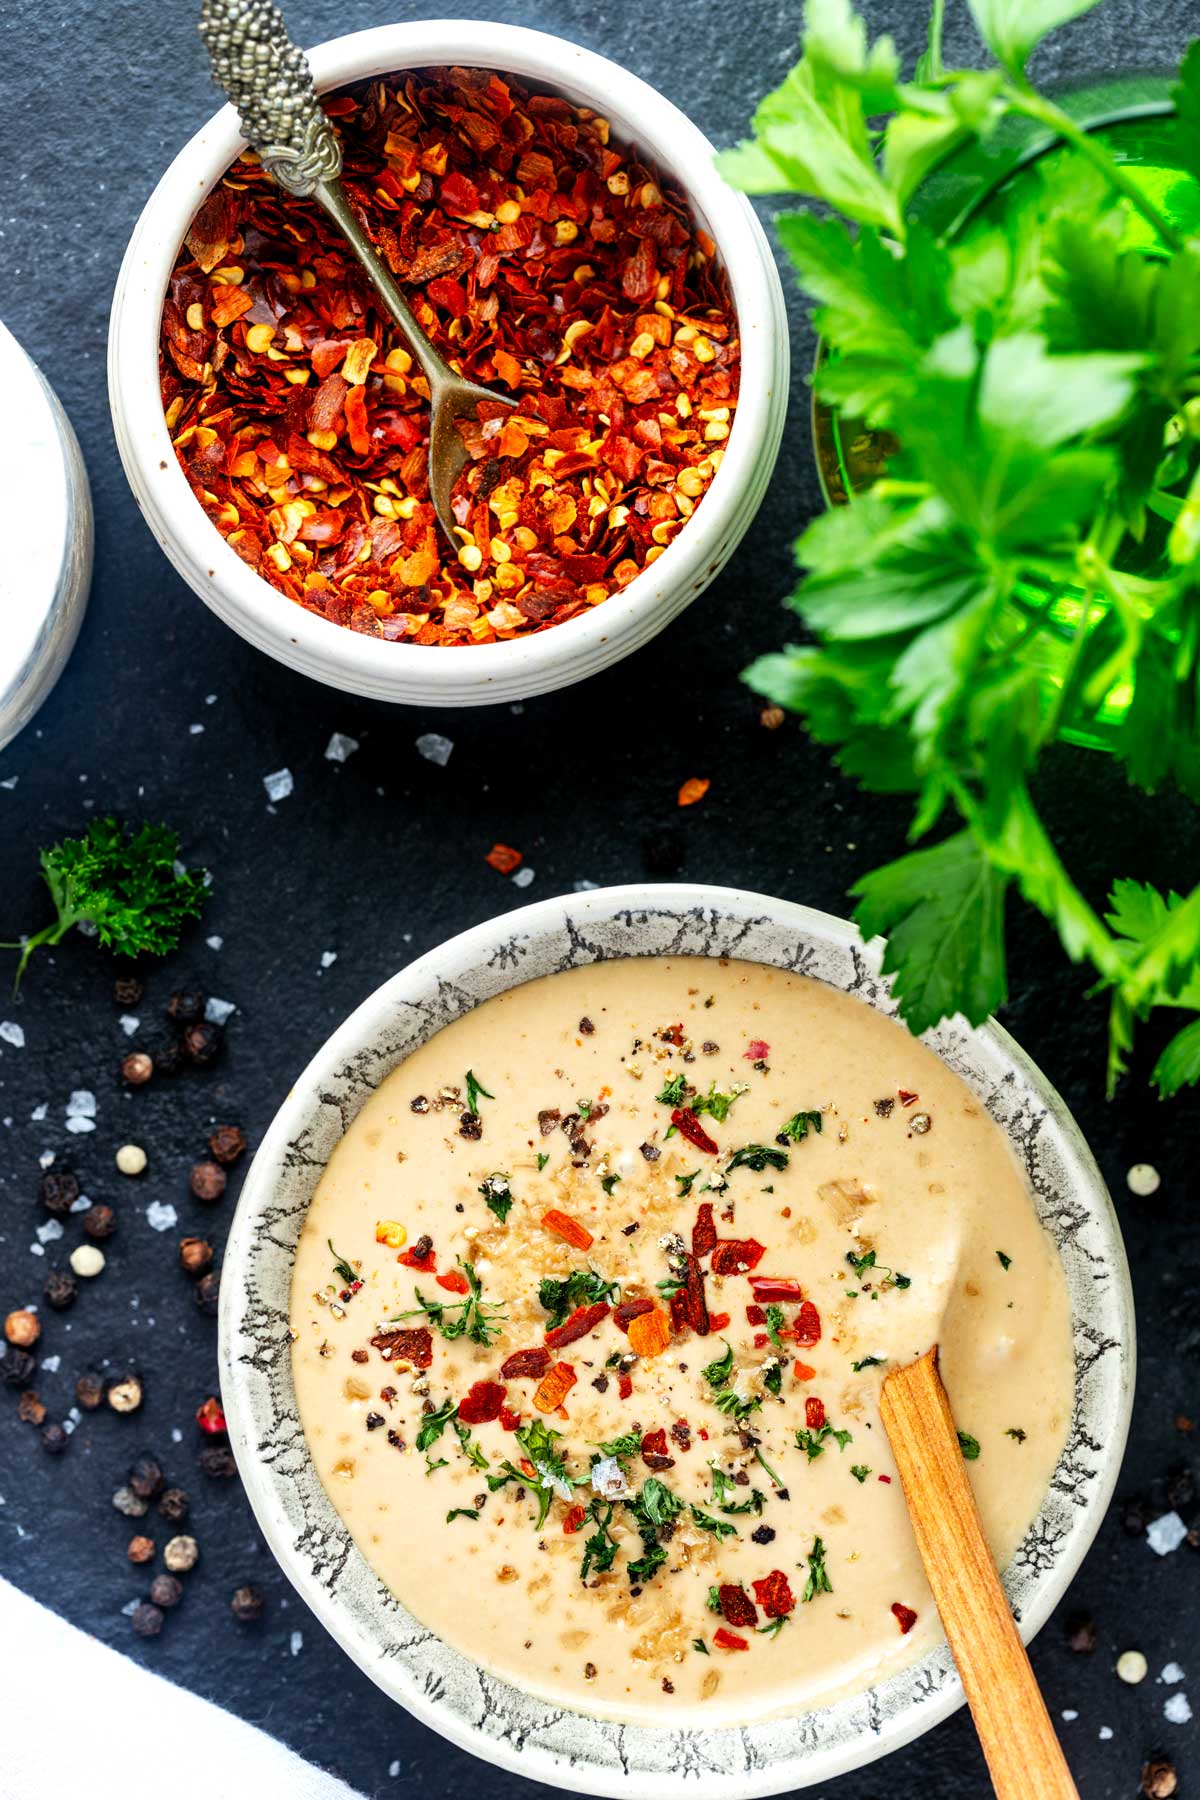 Photo of a small bowl with creamy mustard sauce garnished with parsley and crushed red pepper flakes.